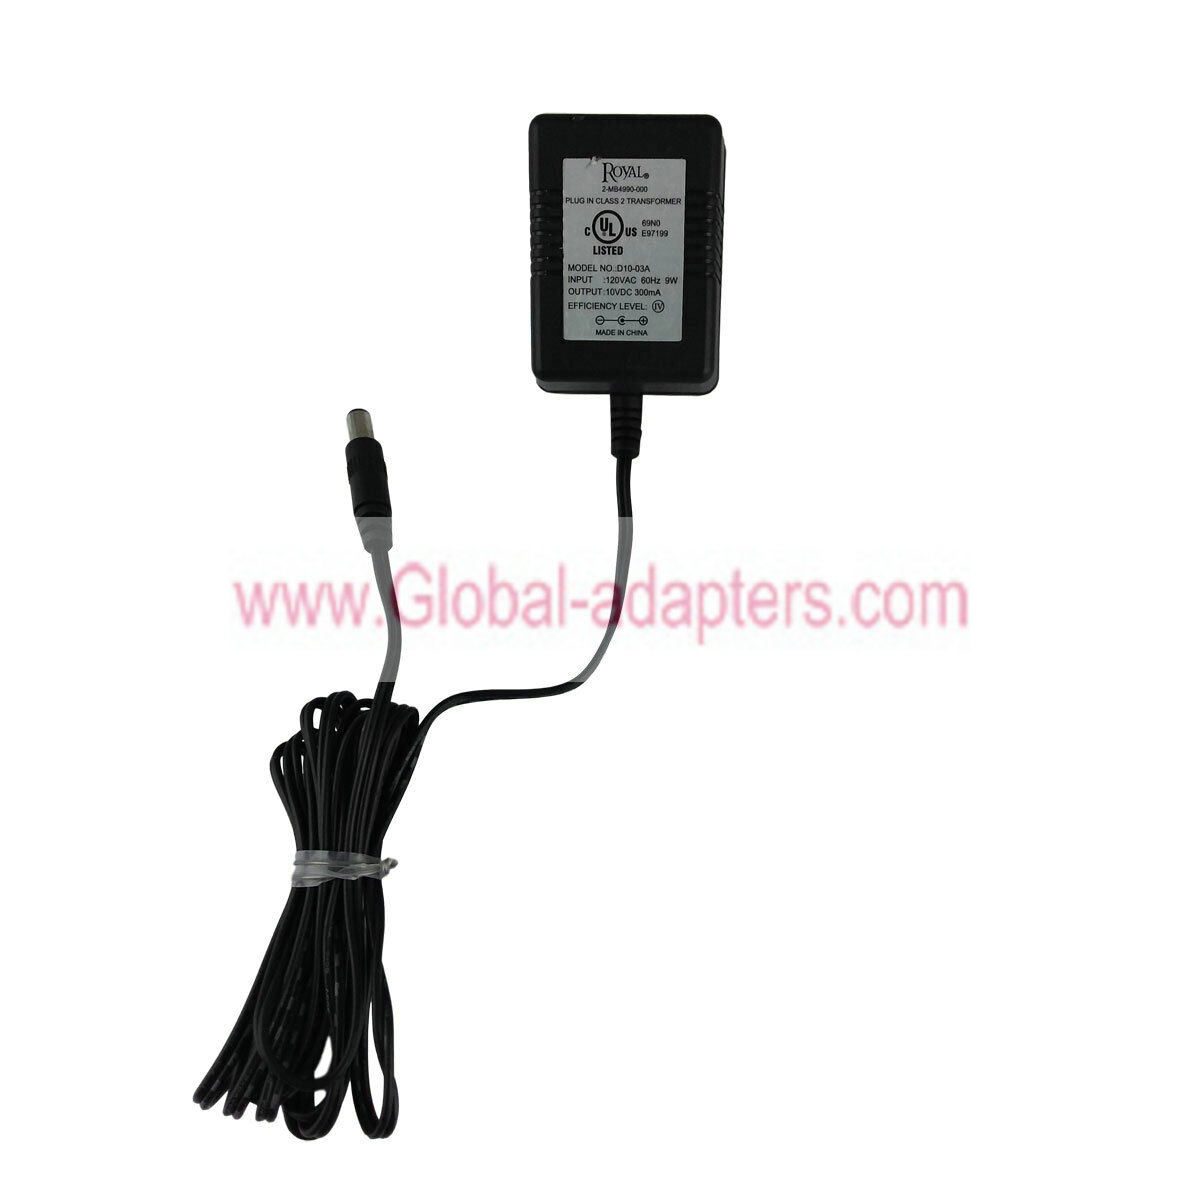 New Royal D10-03A Power Adapter 10V DC 300mA 2-MB4990-000 PLUG-IN CLASS 2 TRANSFORMER AC ADAPTER